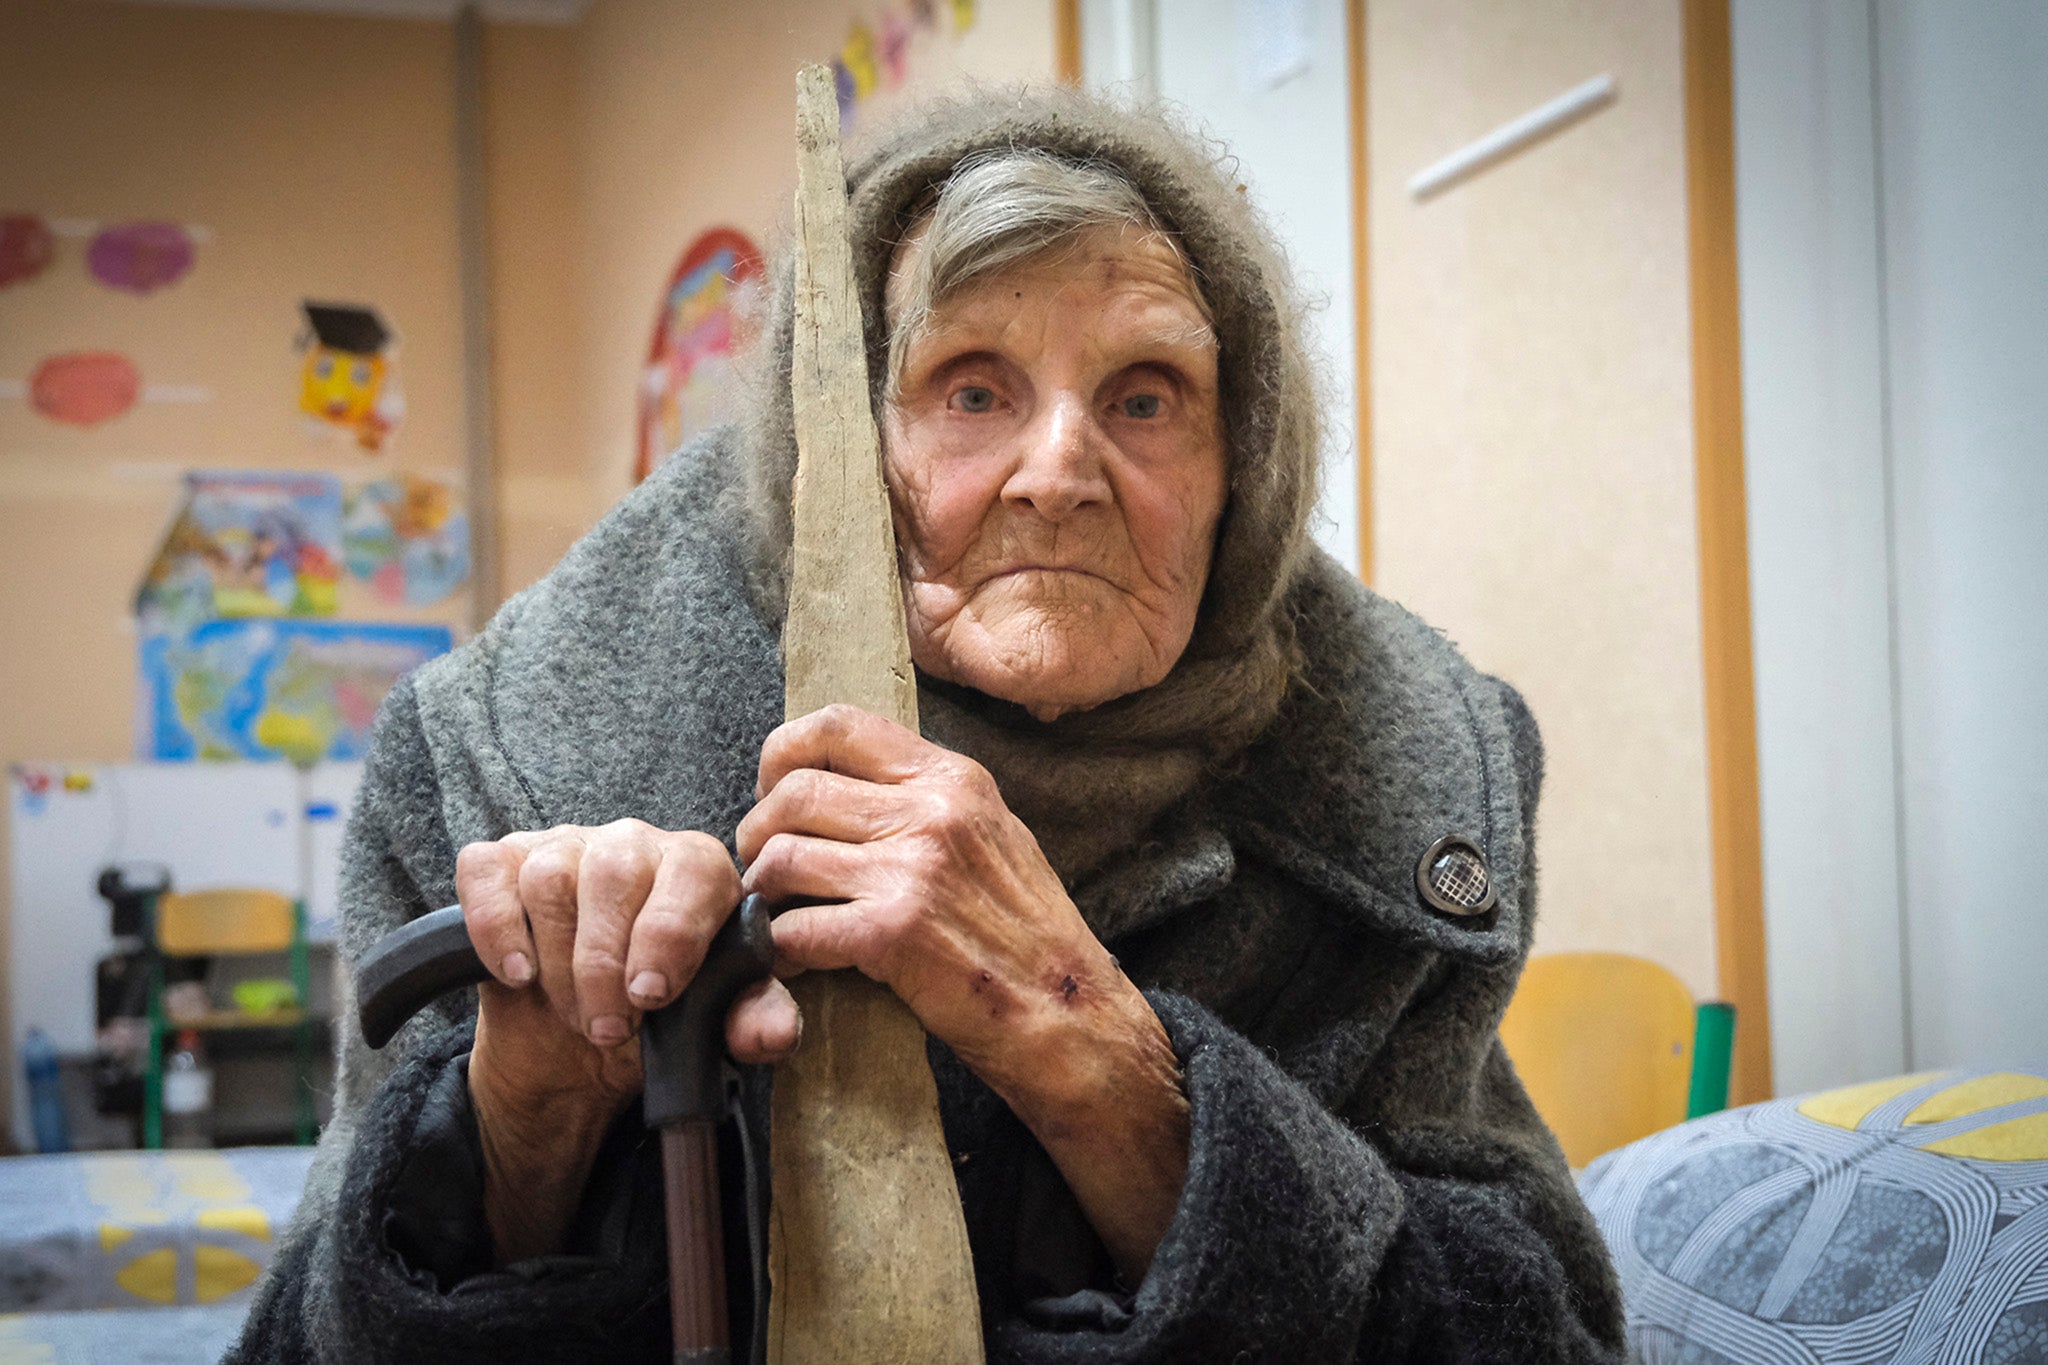 Lidia Lomikovska fled her house in the village of Ocheretyne on foot after a bombardment